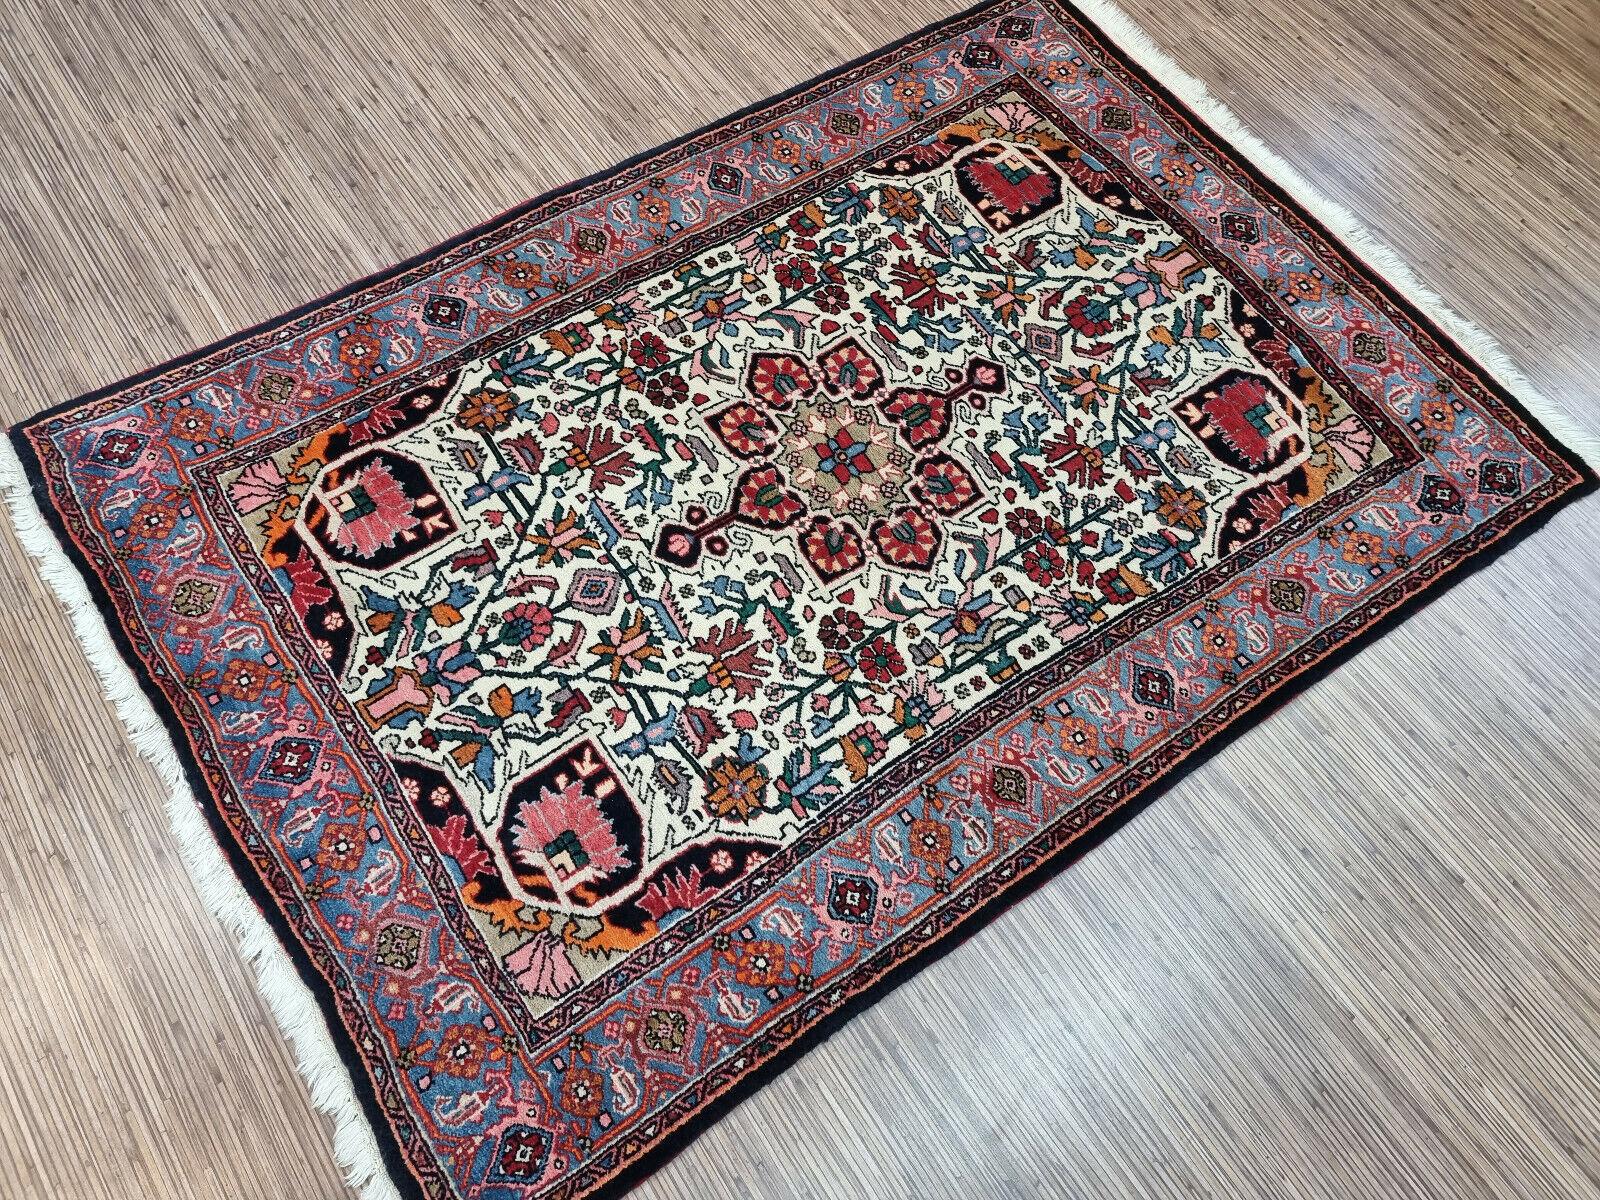 Handmade Vintage Persian Style Bidjar Rug 3.4' x 5', 1970s - 1D88 In Good Condition For Sale In Bordeaux, FR